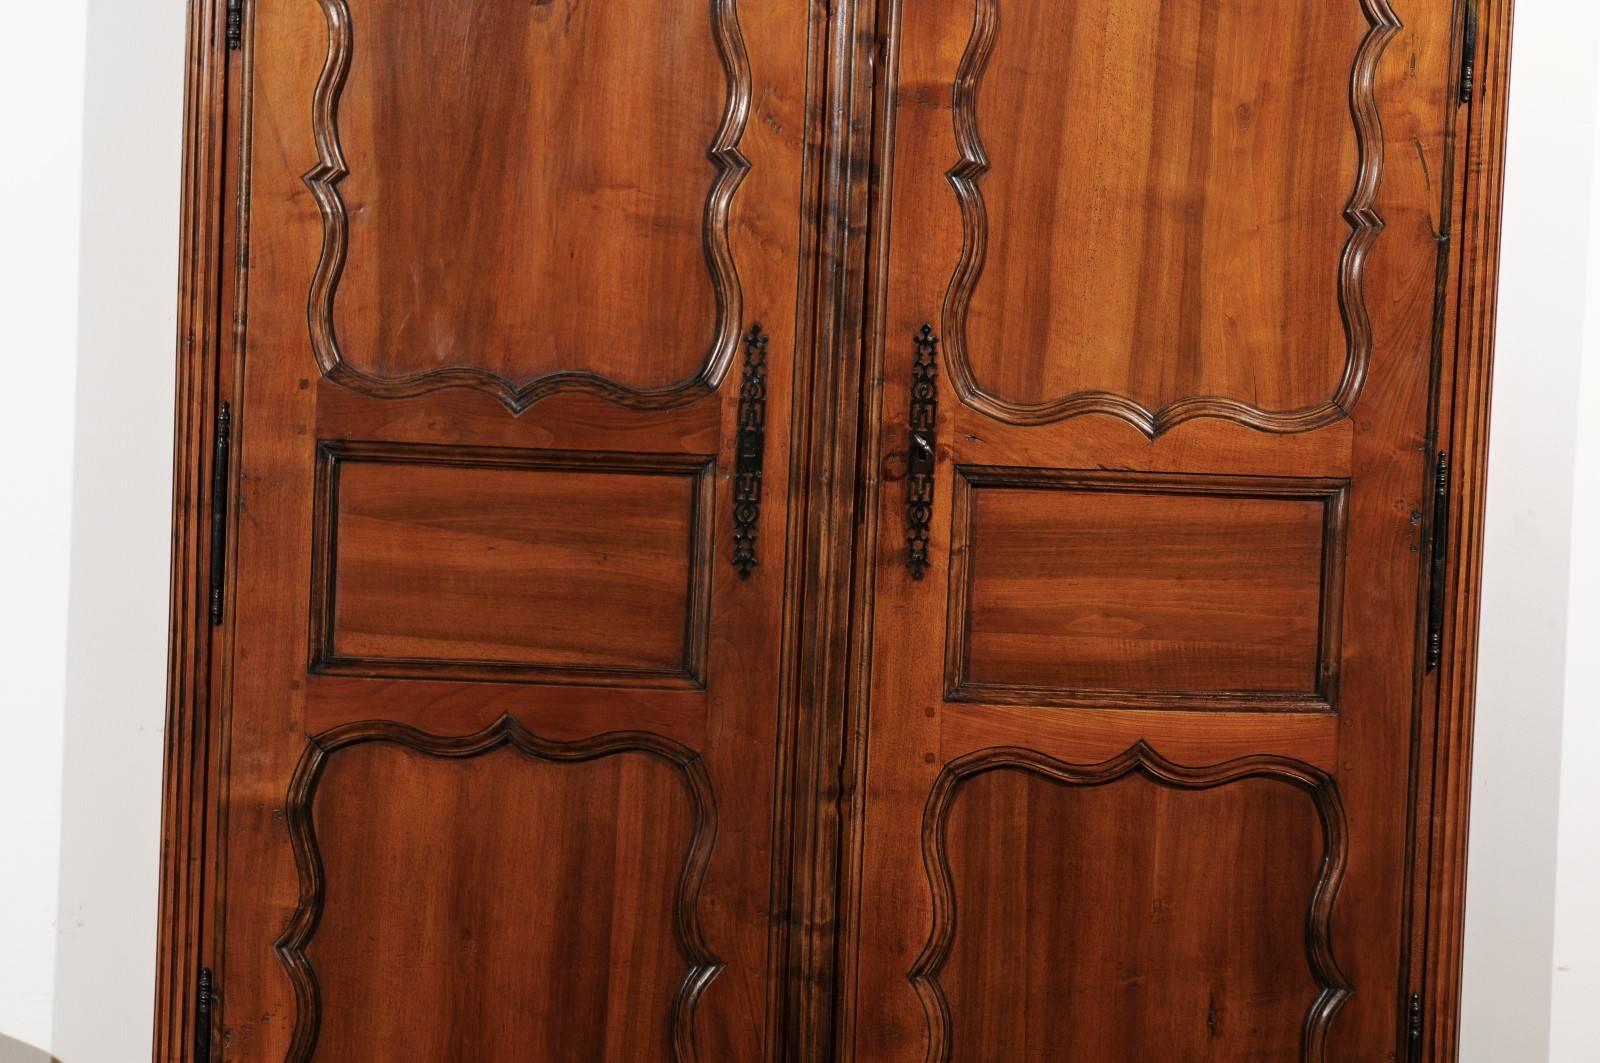 19th Century French Walnut Louis XV Style Armoire Façade with Carved Panels, circa 1850